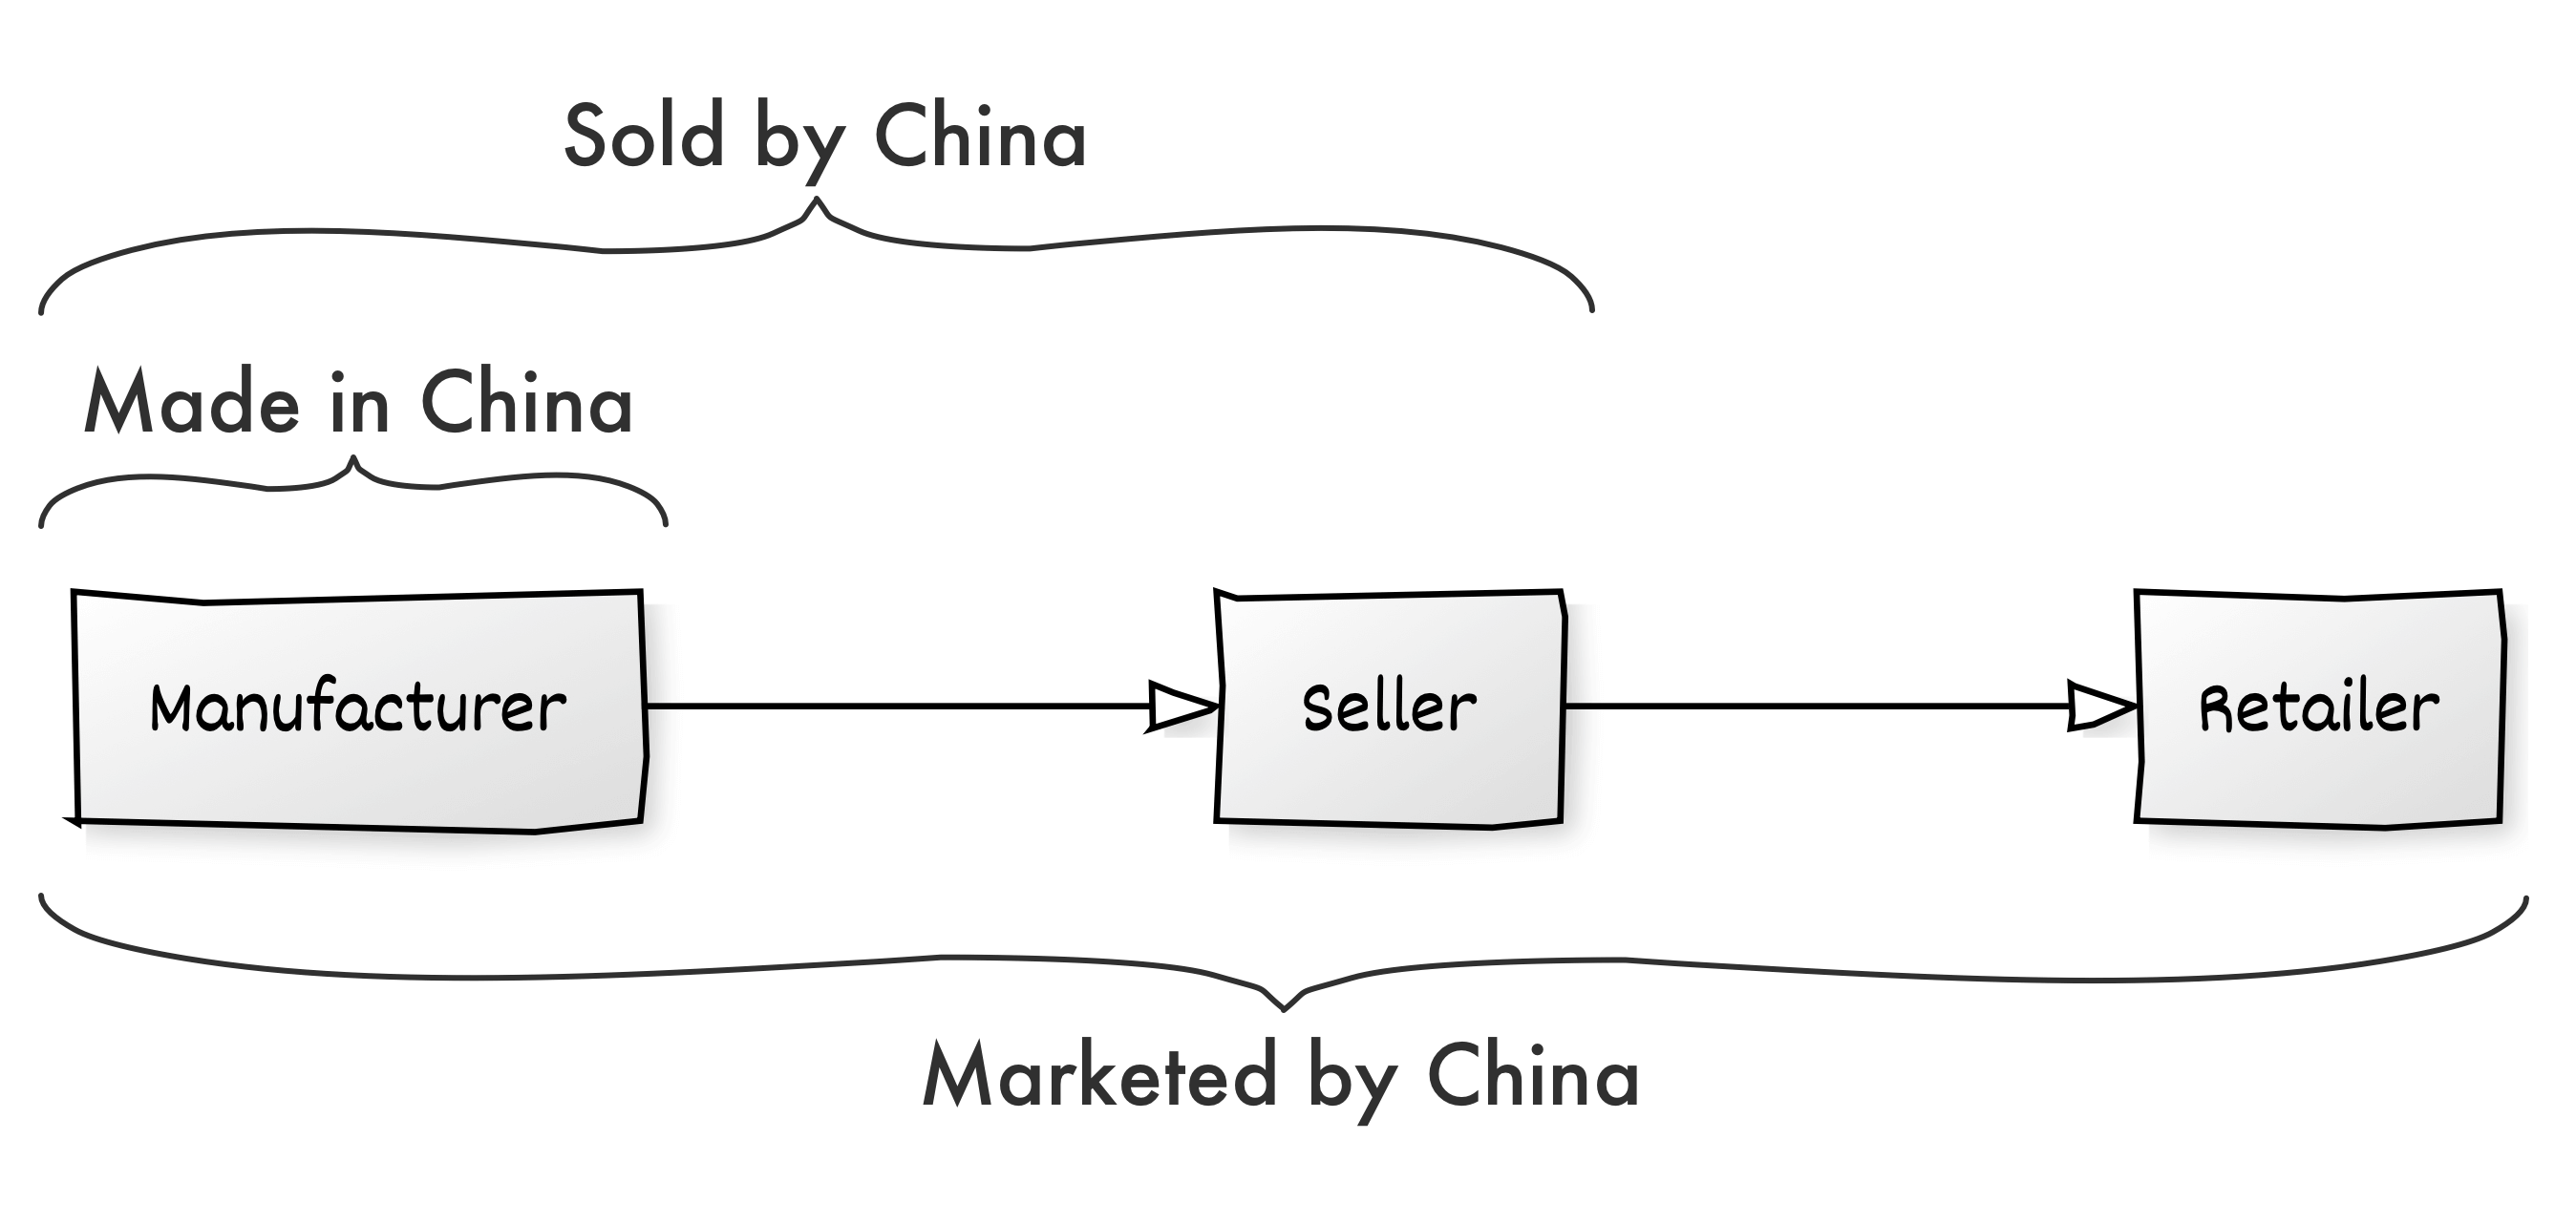 Made, Sold, Marketed by China